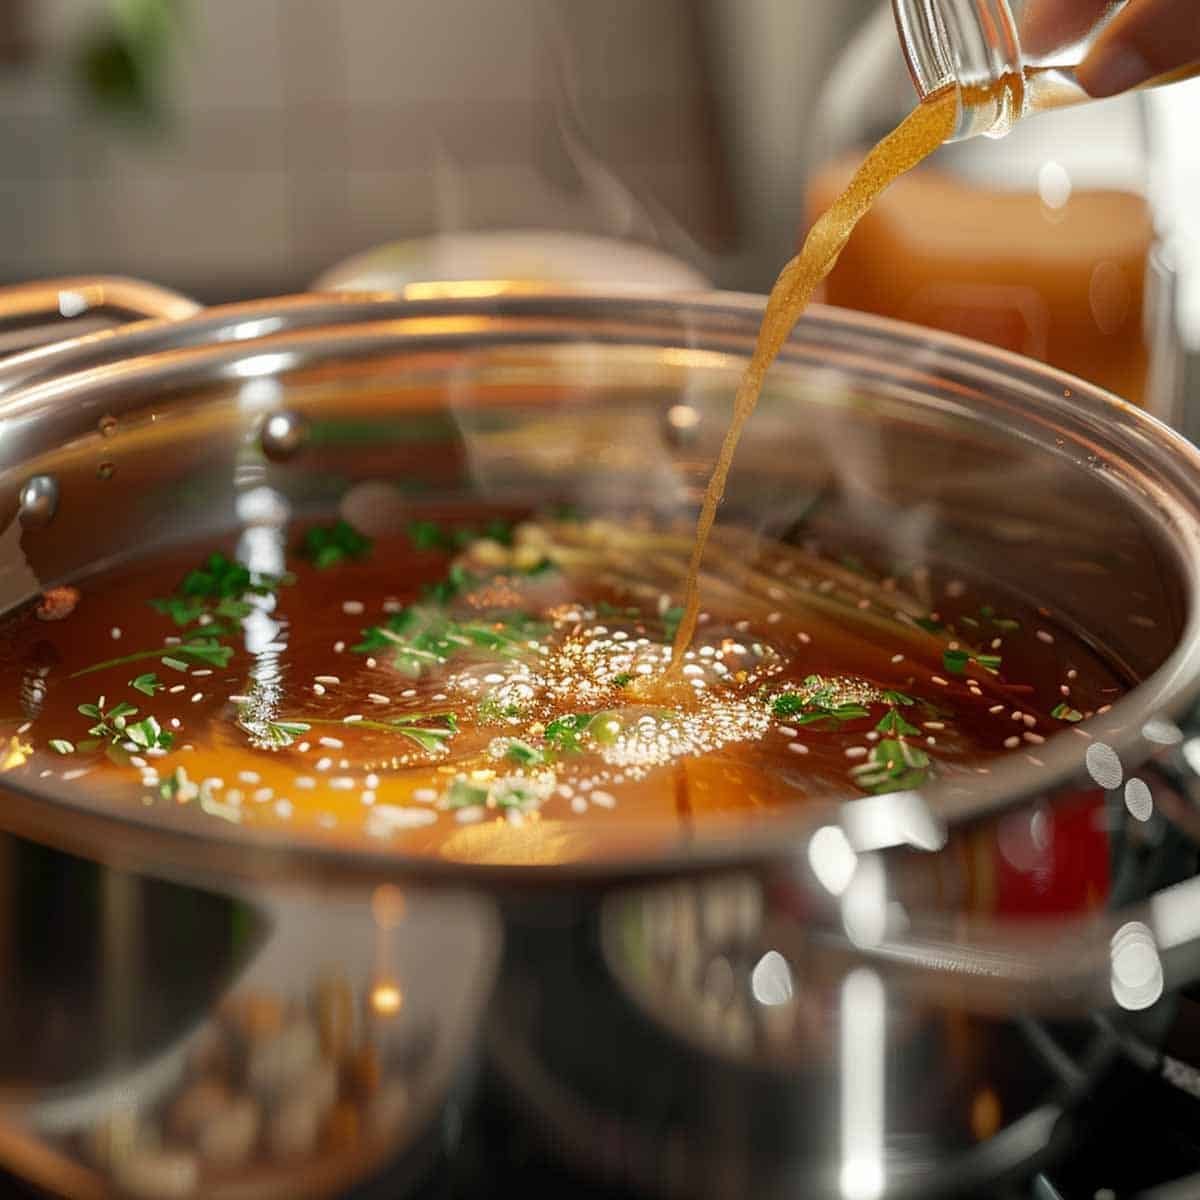 An image showing a variety of spices being added to a pot of simmering Thai Rice Soup (Khao Tom). The spices, including peppercorns, bay leaves, and cloves, are captured mid-fall, creating a dynamic sprinkle effect above the steaming liquid. This addition enriches the broth, infusing it with deep, aromatic flavors essential for a flavorful base in many recipes.